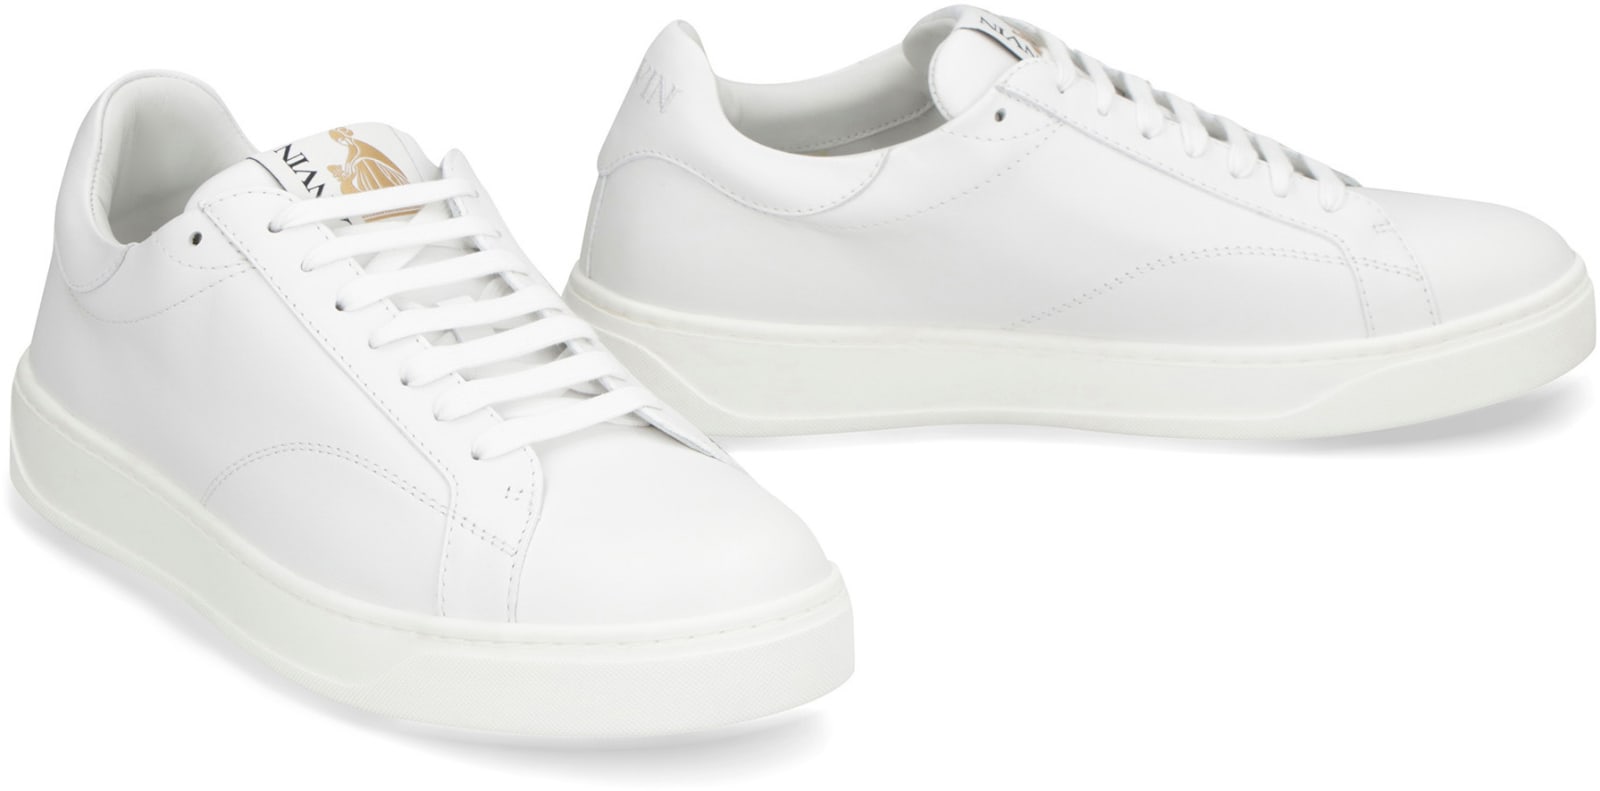 Shop Lanvin Ddb0 Leather Low-top Sneakers In White